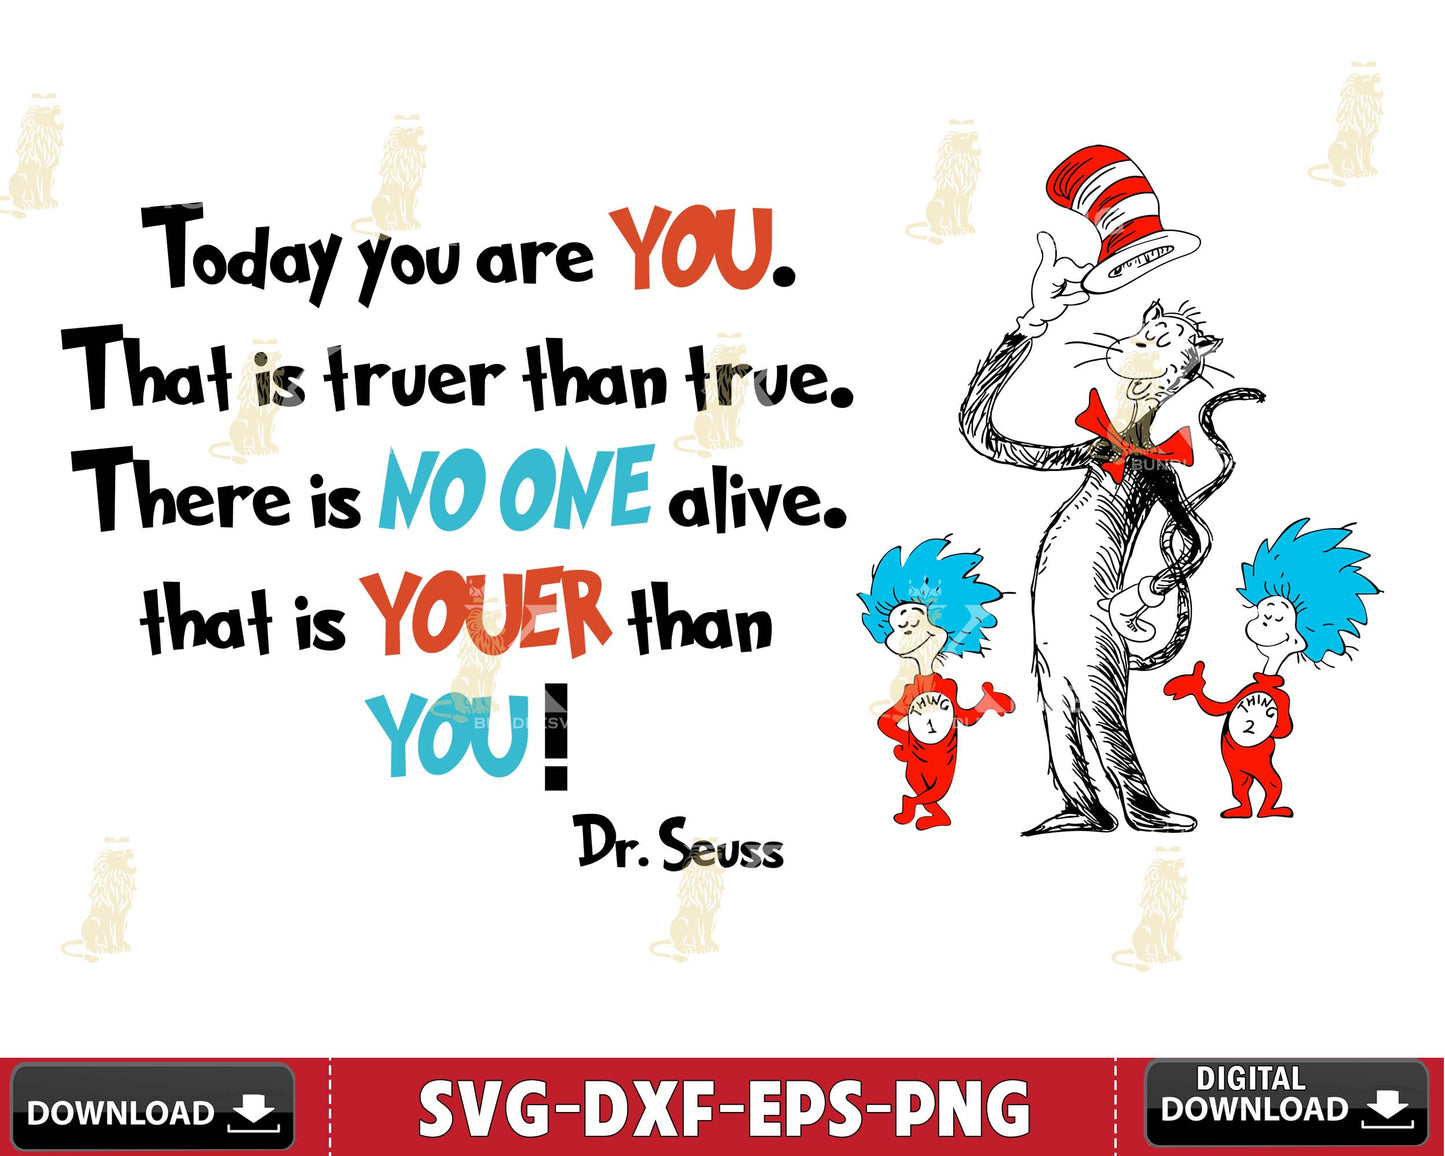 Dr Seuss today you are you,that is truer than true, there is no one al ...